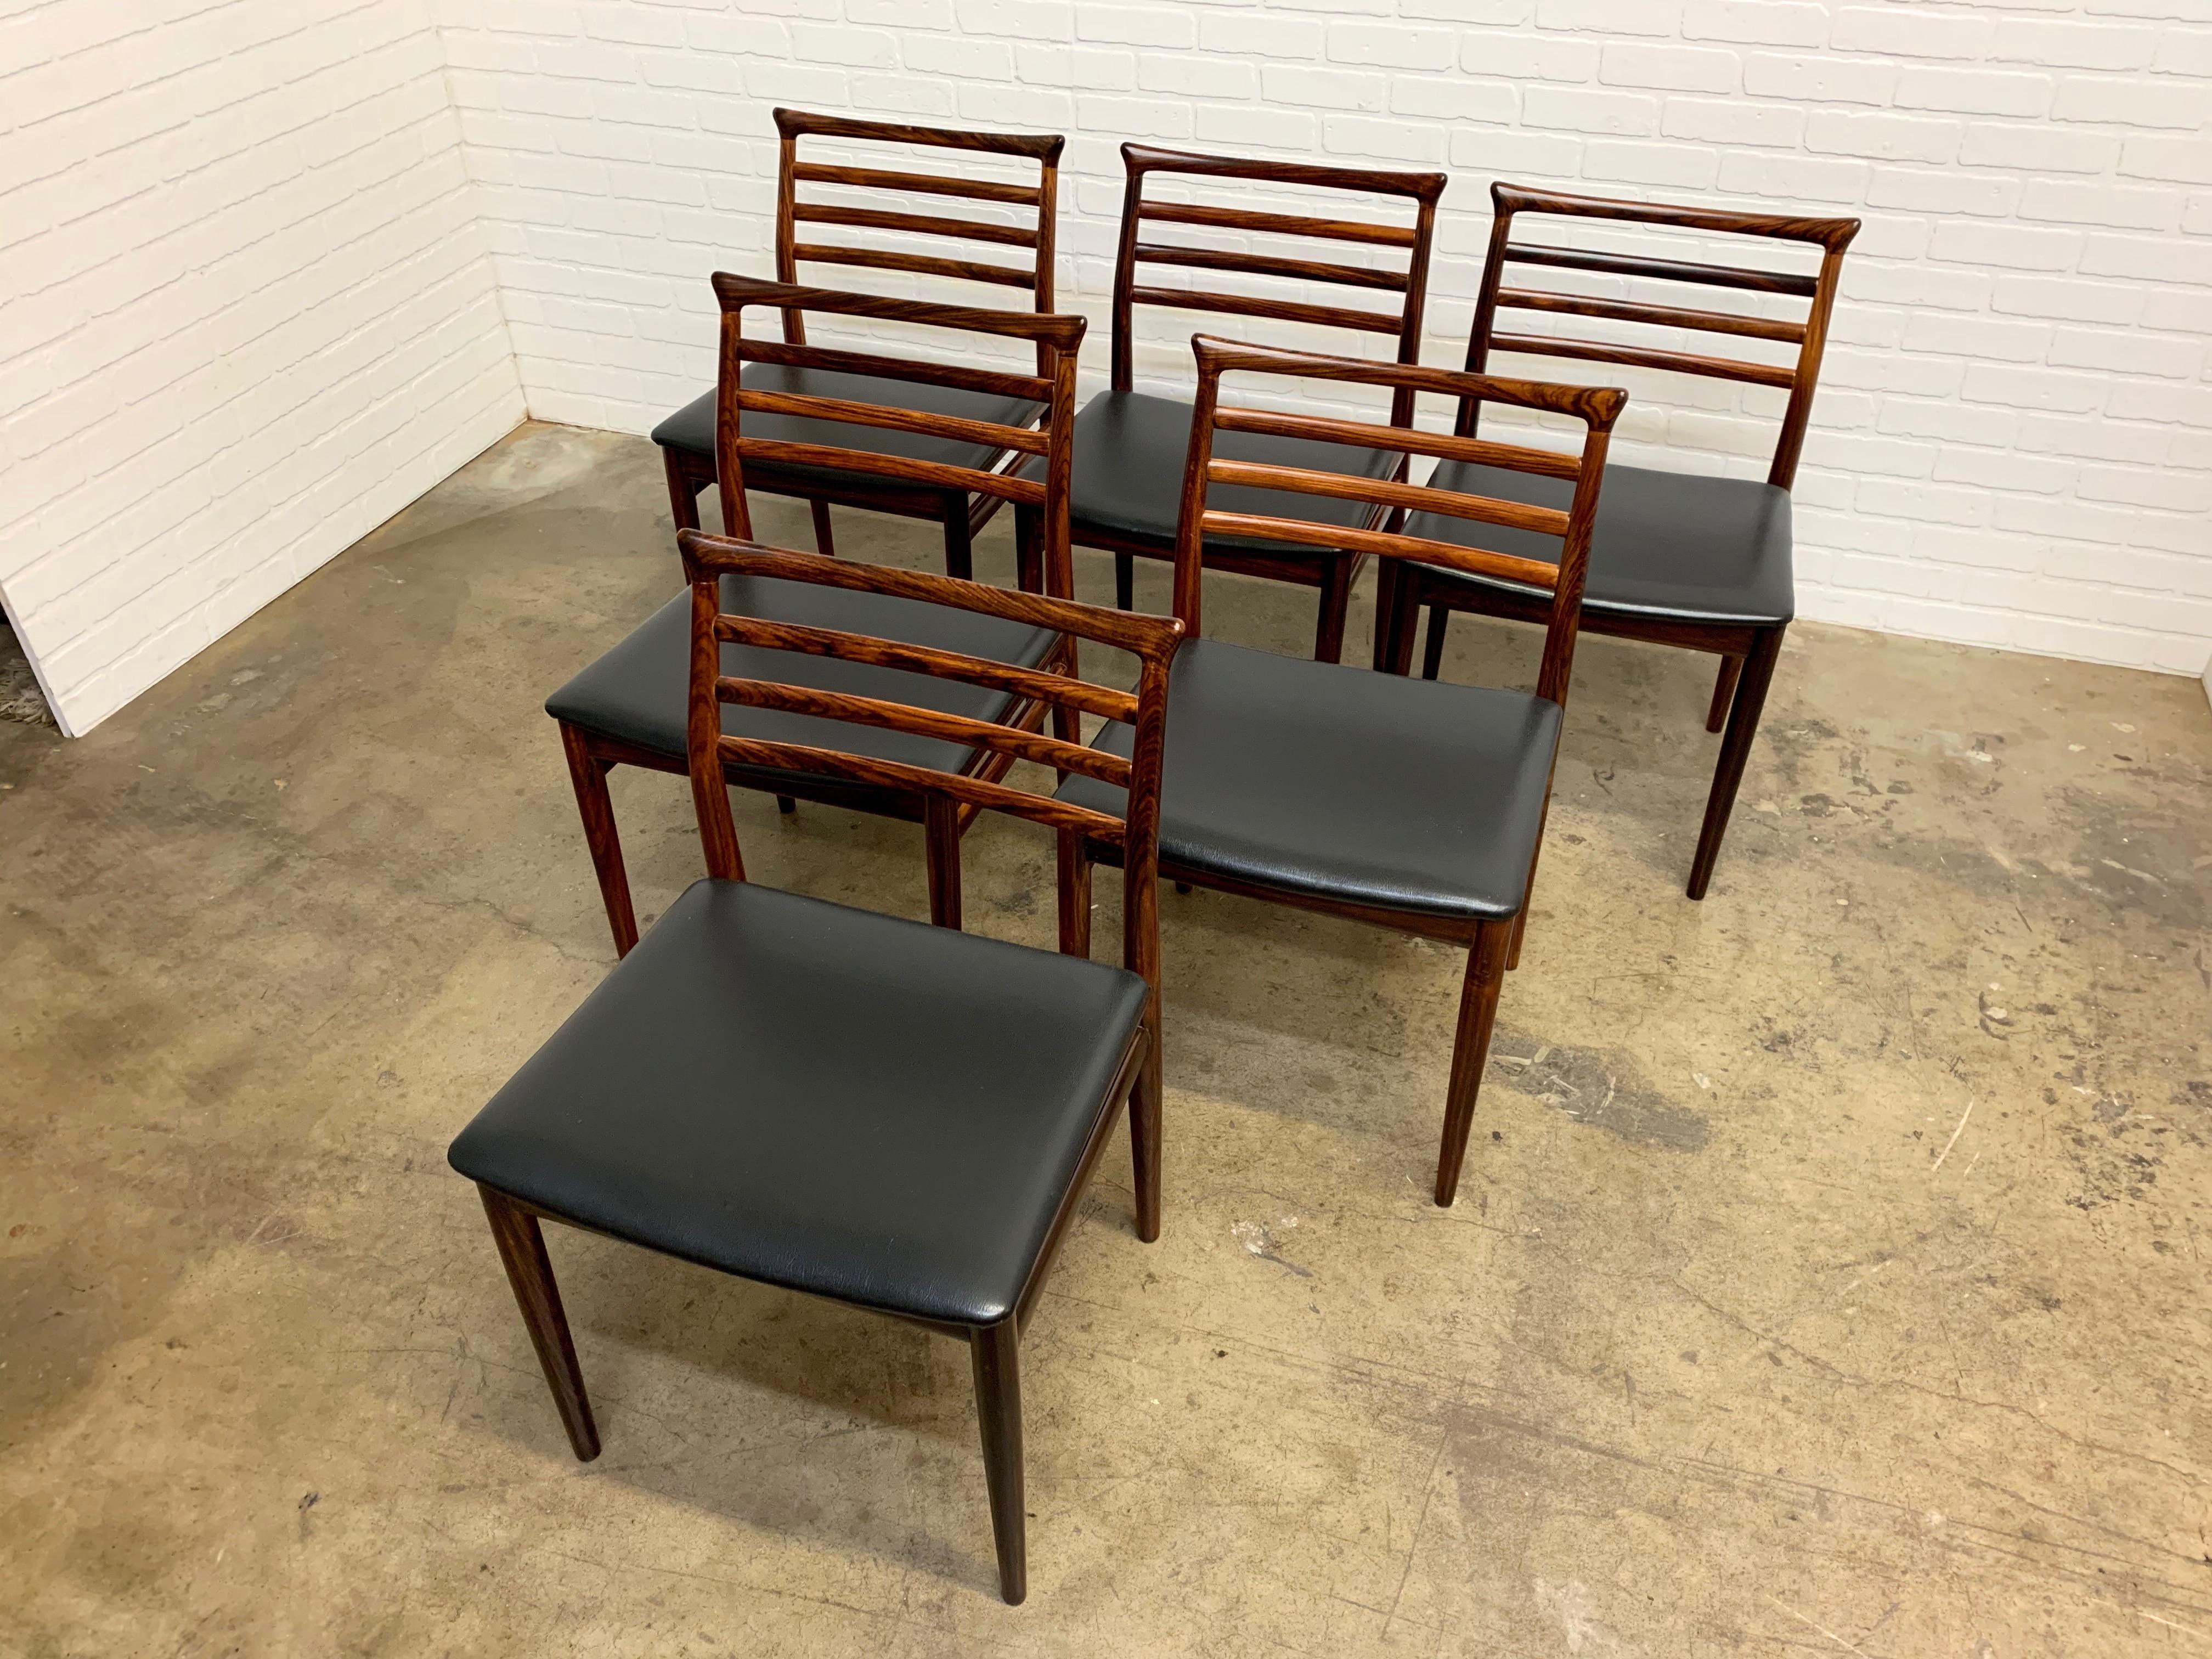 Midcentury Danish modern design chairs by Erling Tovits. These high quality rosewood chairs was manufactured by Sorø stolefabrik in the 1960s.